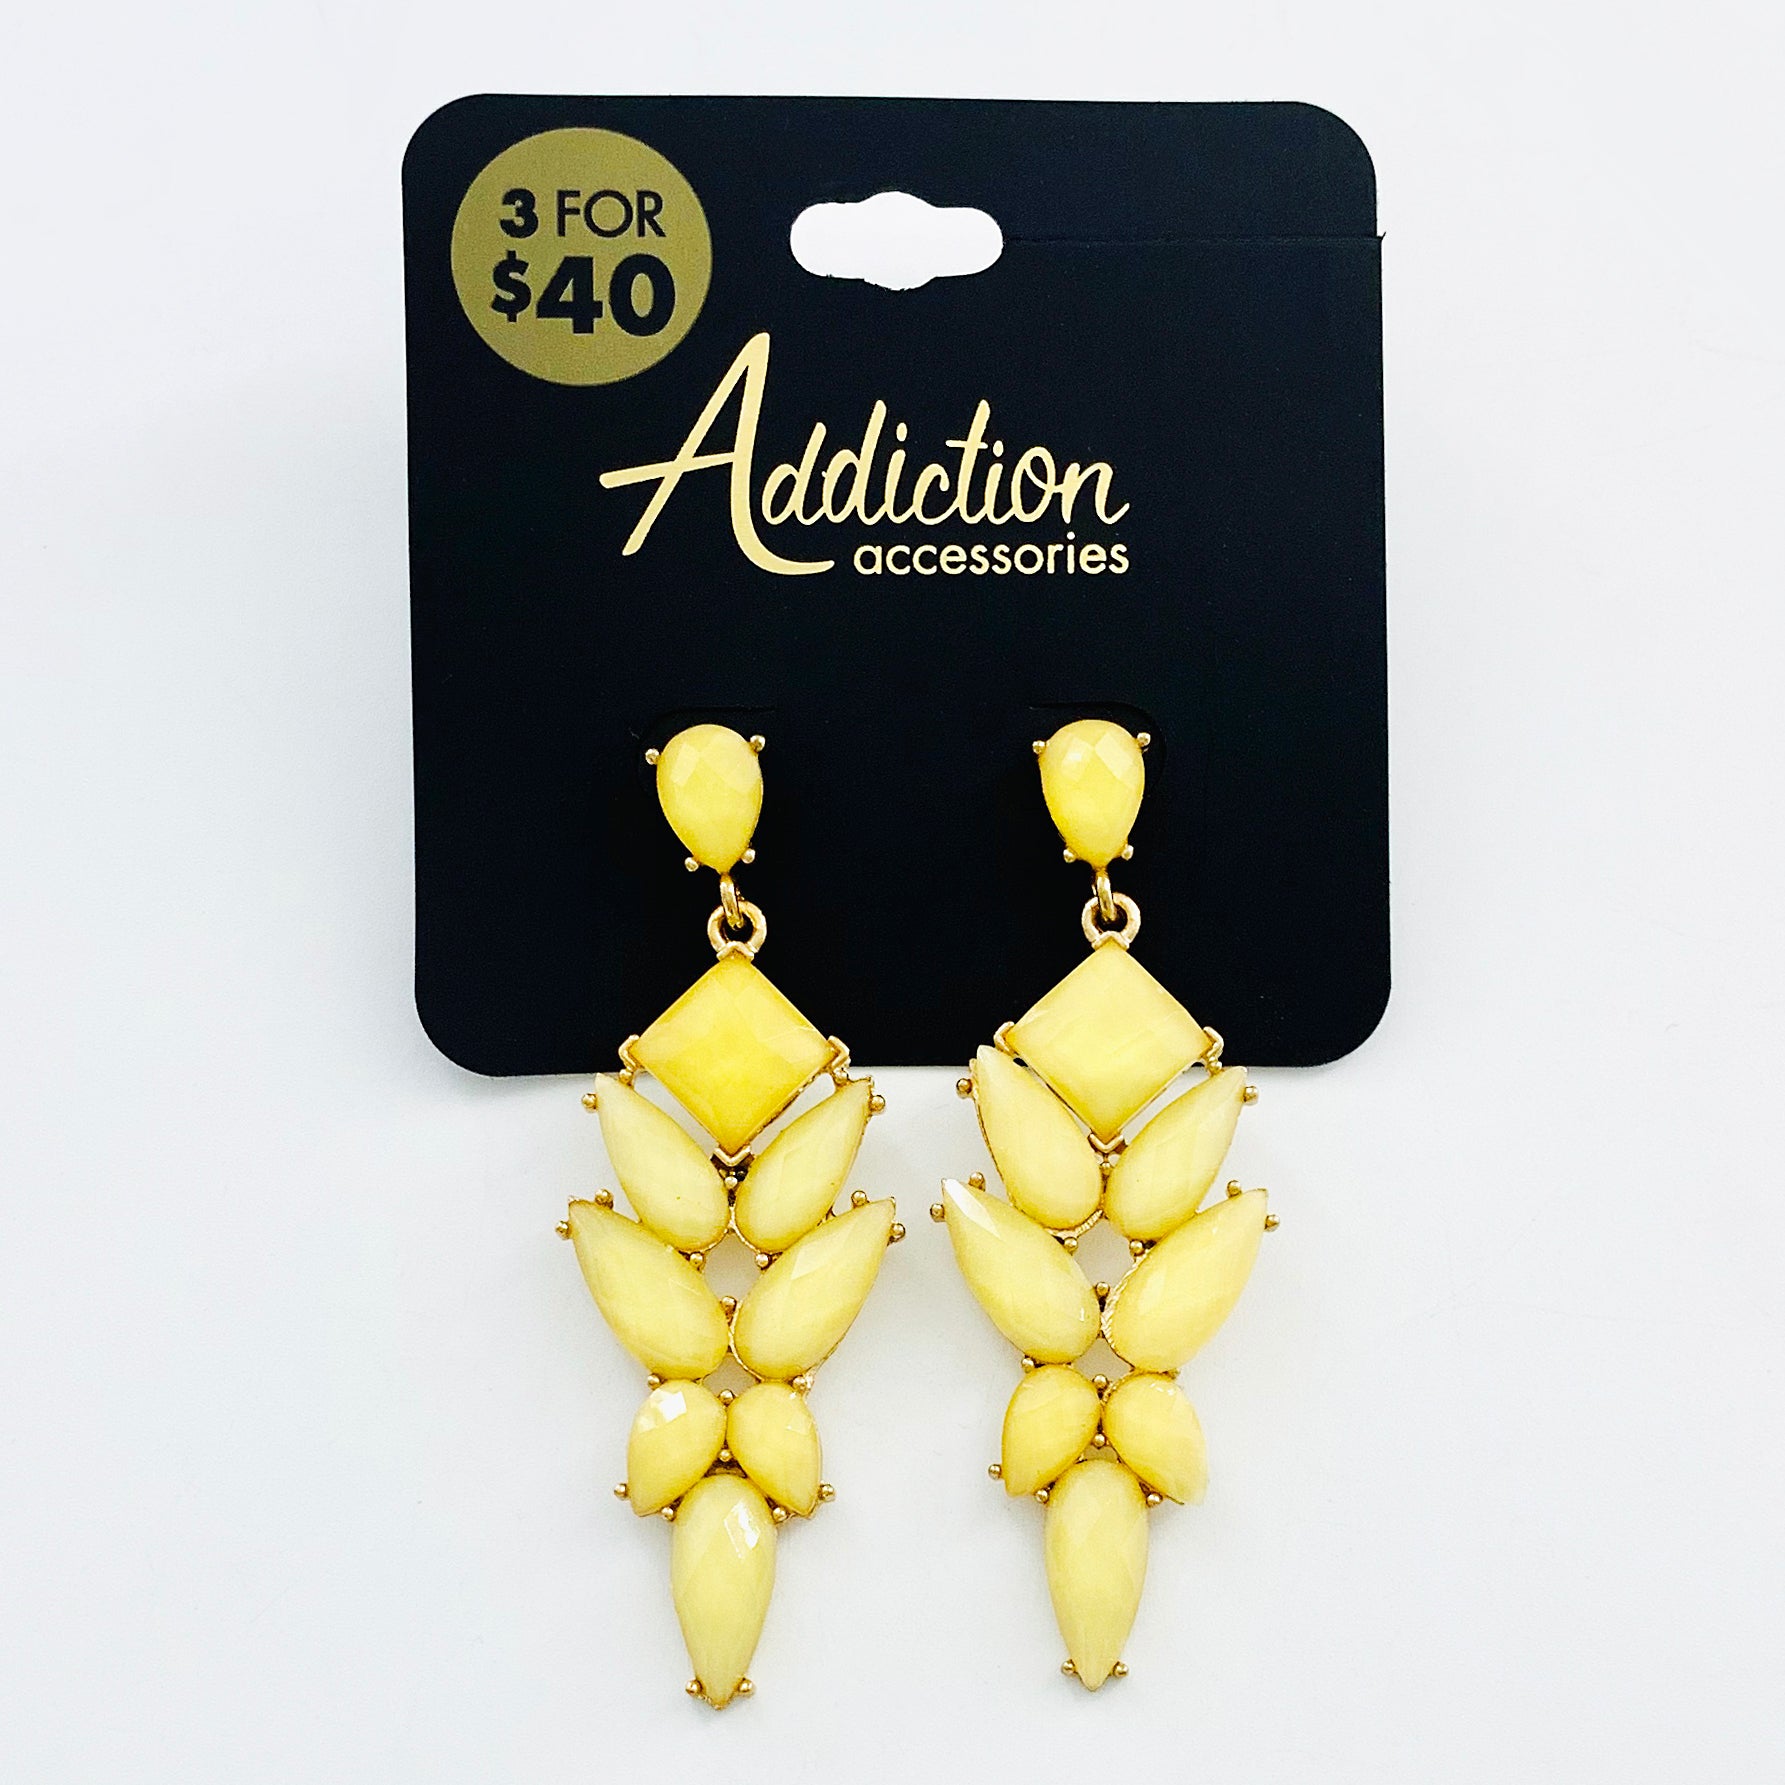 Earrings with faceted yellow teardrops